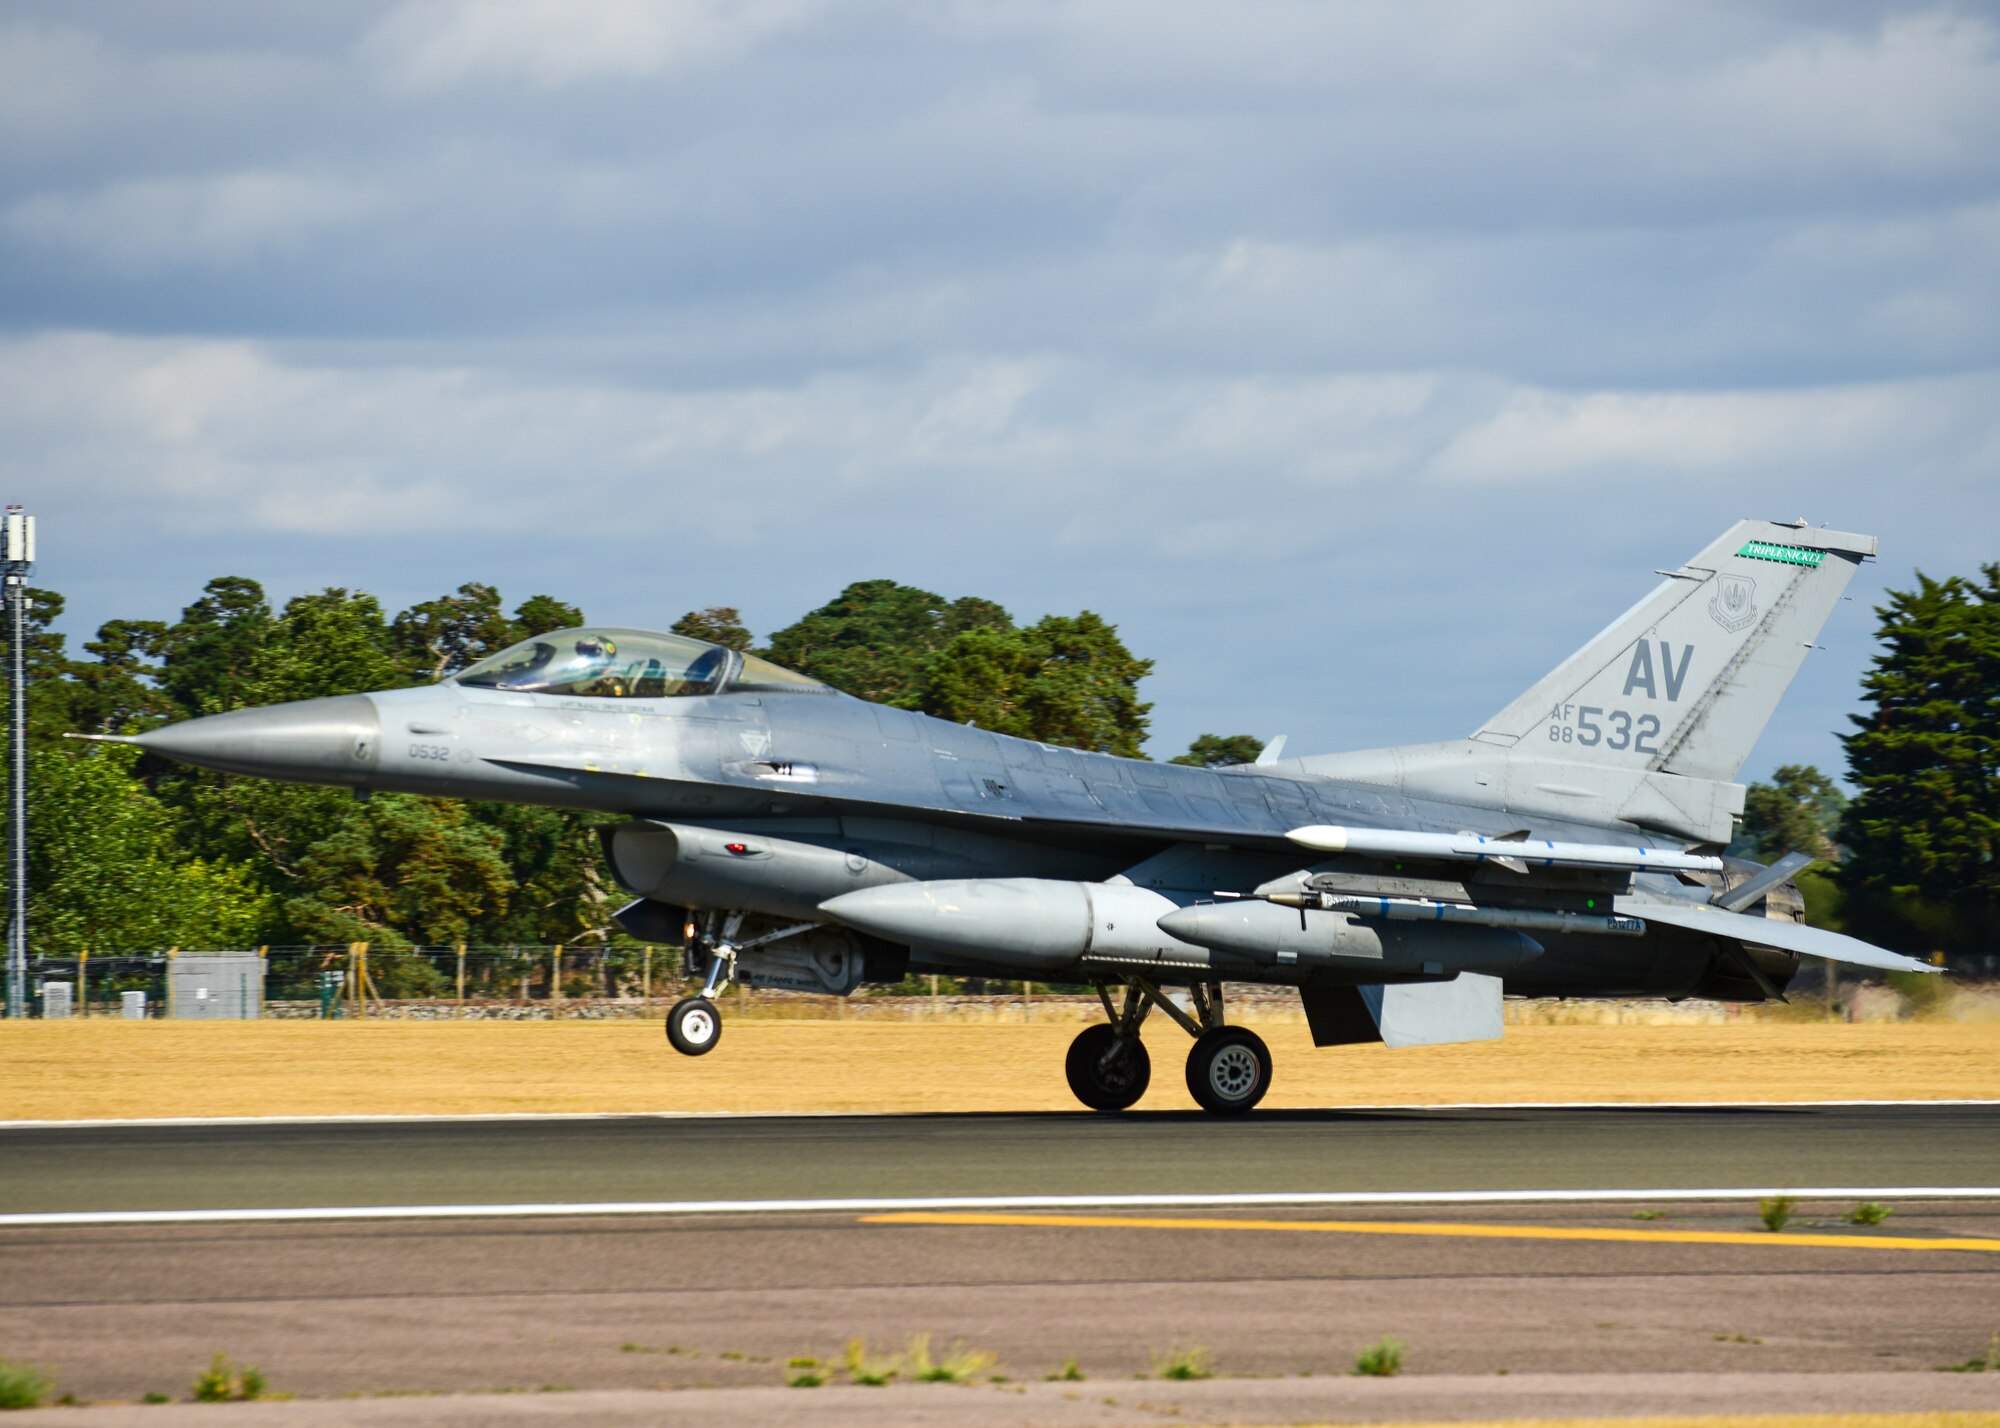 A U.S. Air Force F-16C Fighting Falcon, assigned to the 555th Fighter Squadron from the 31st Fighter Wing, Aviano Air Base, Italy, lands